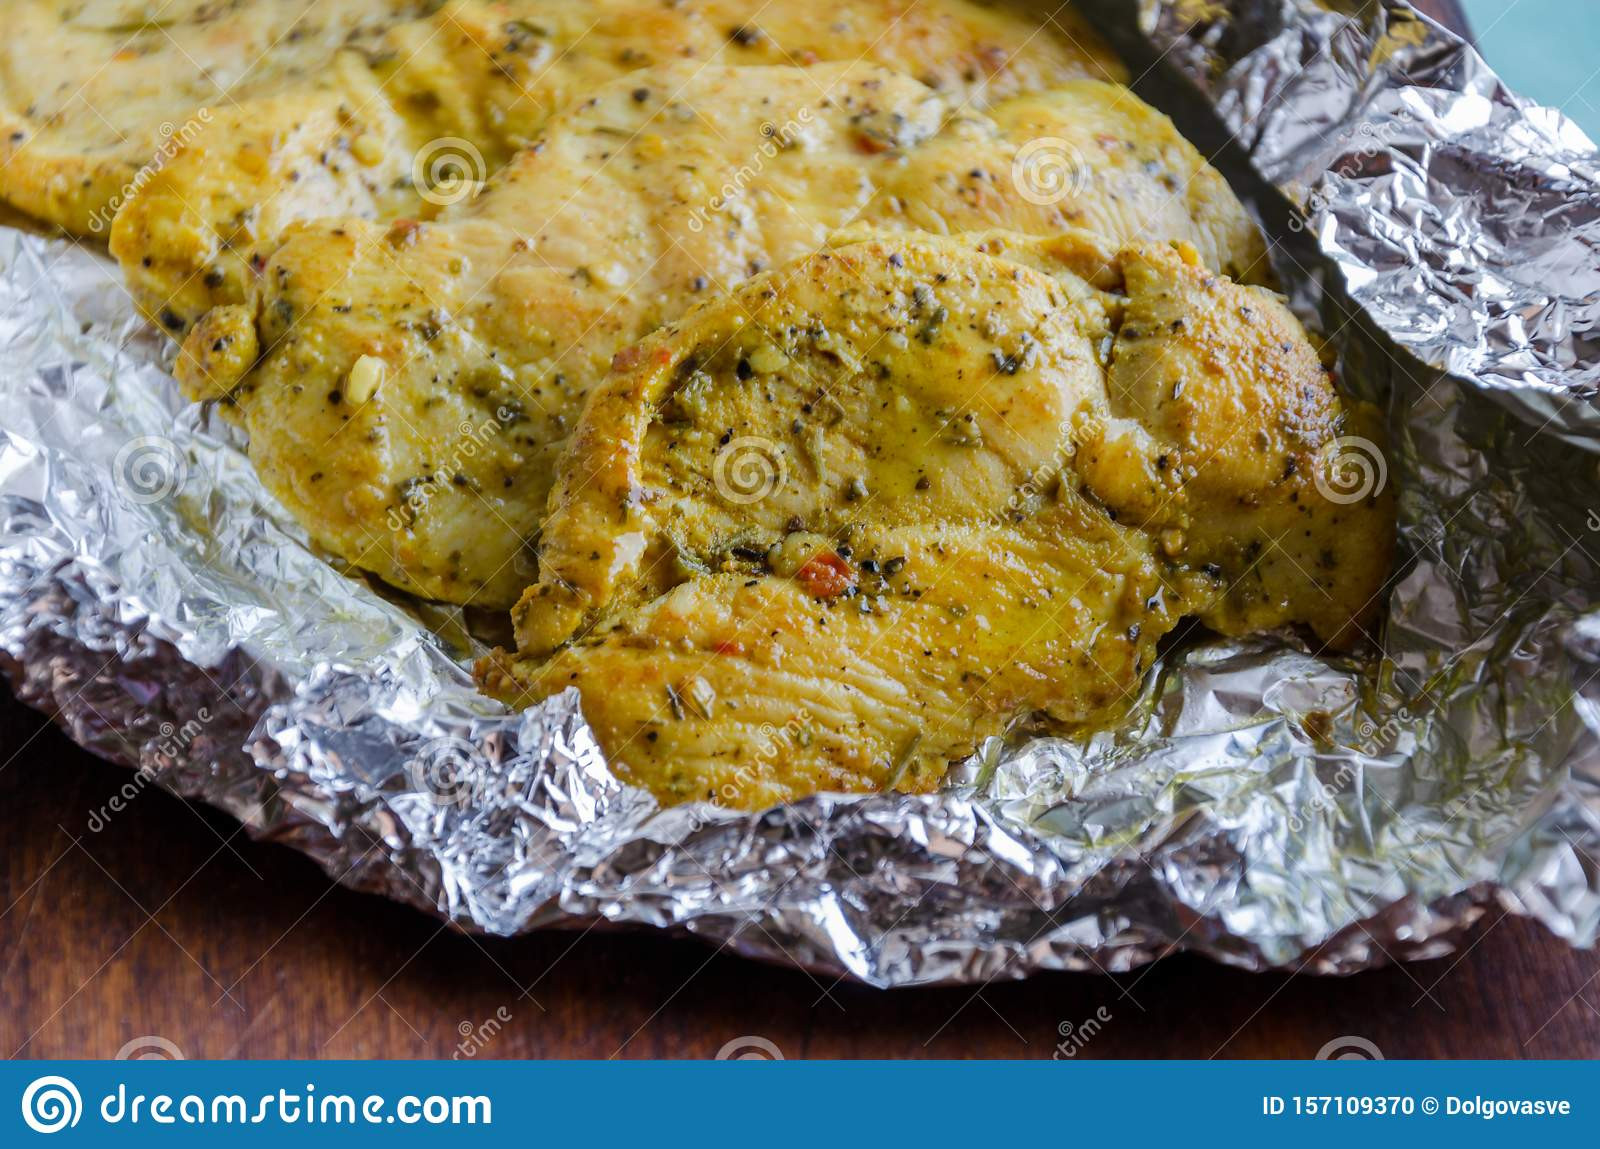 Baked Chicken Breasts In Foil
 Chicken Breasts Baked With Seasoning In Foil Stock